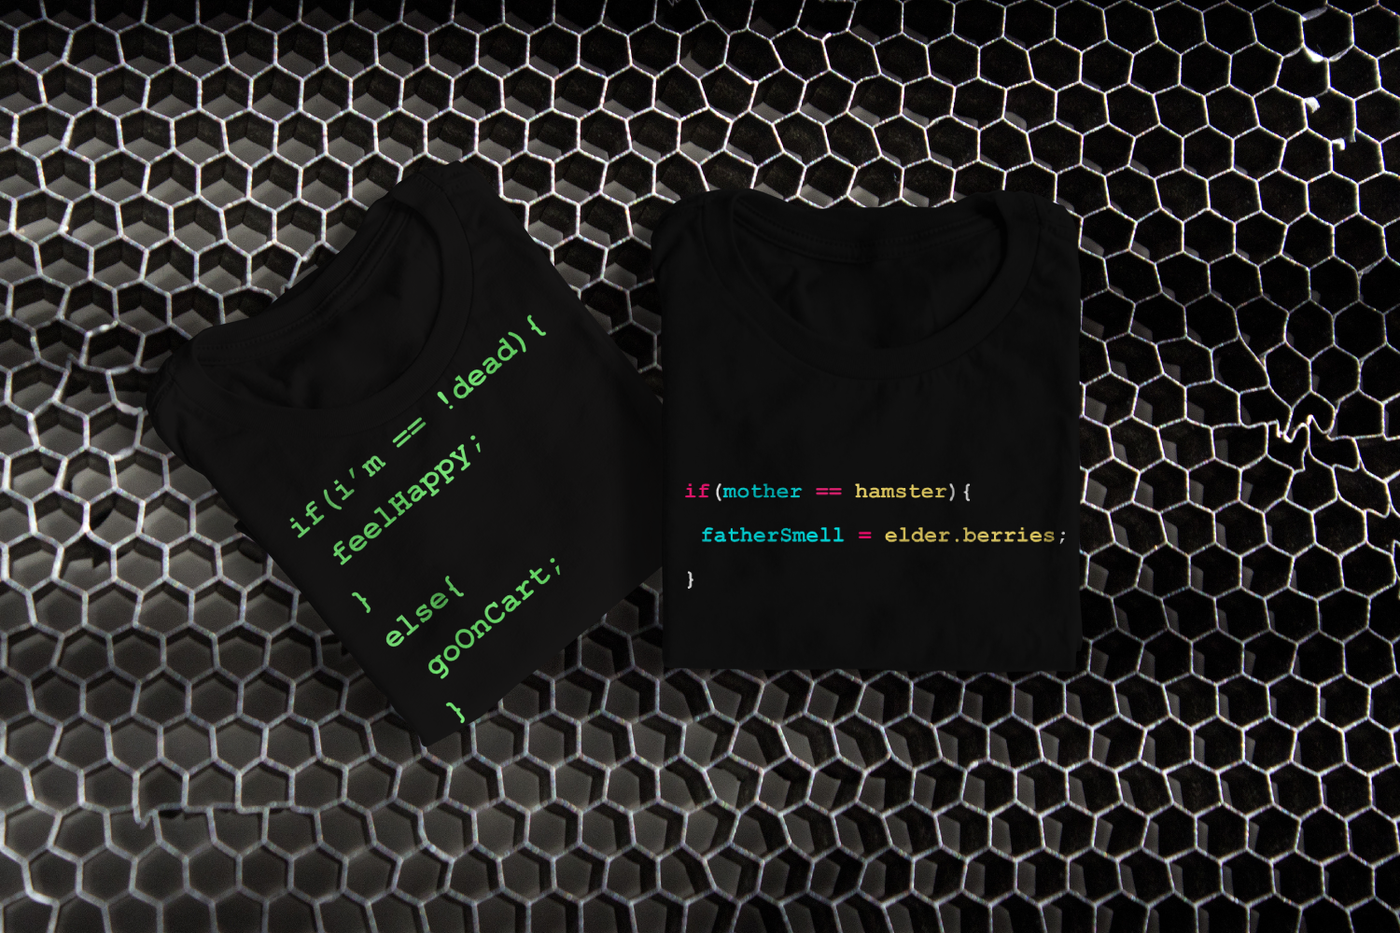 Two black tees with computer code. The code type is Python, but references Monty Python and the Holy Grail quotes.